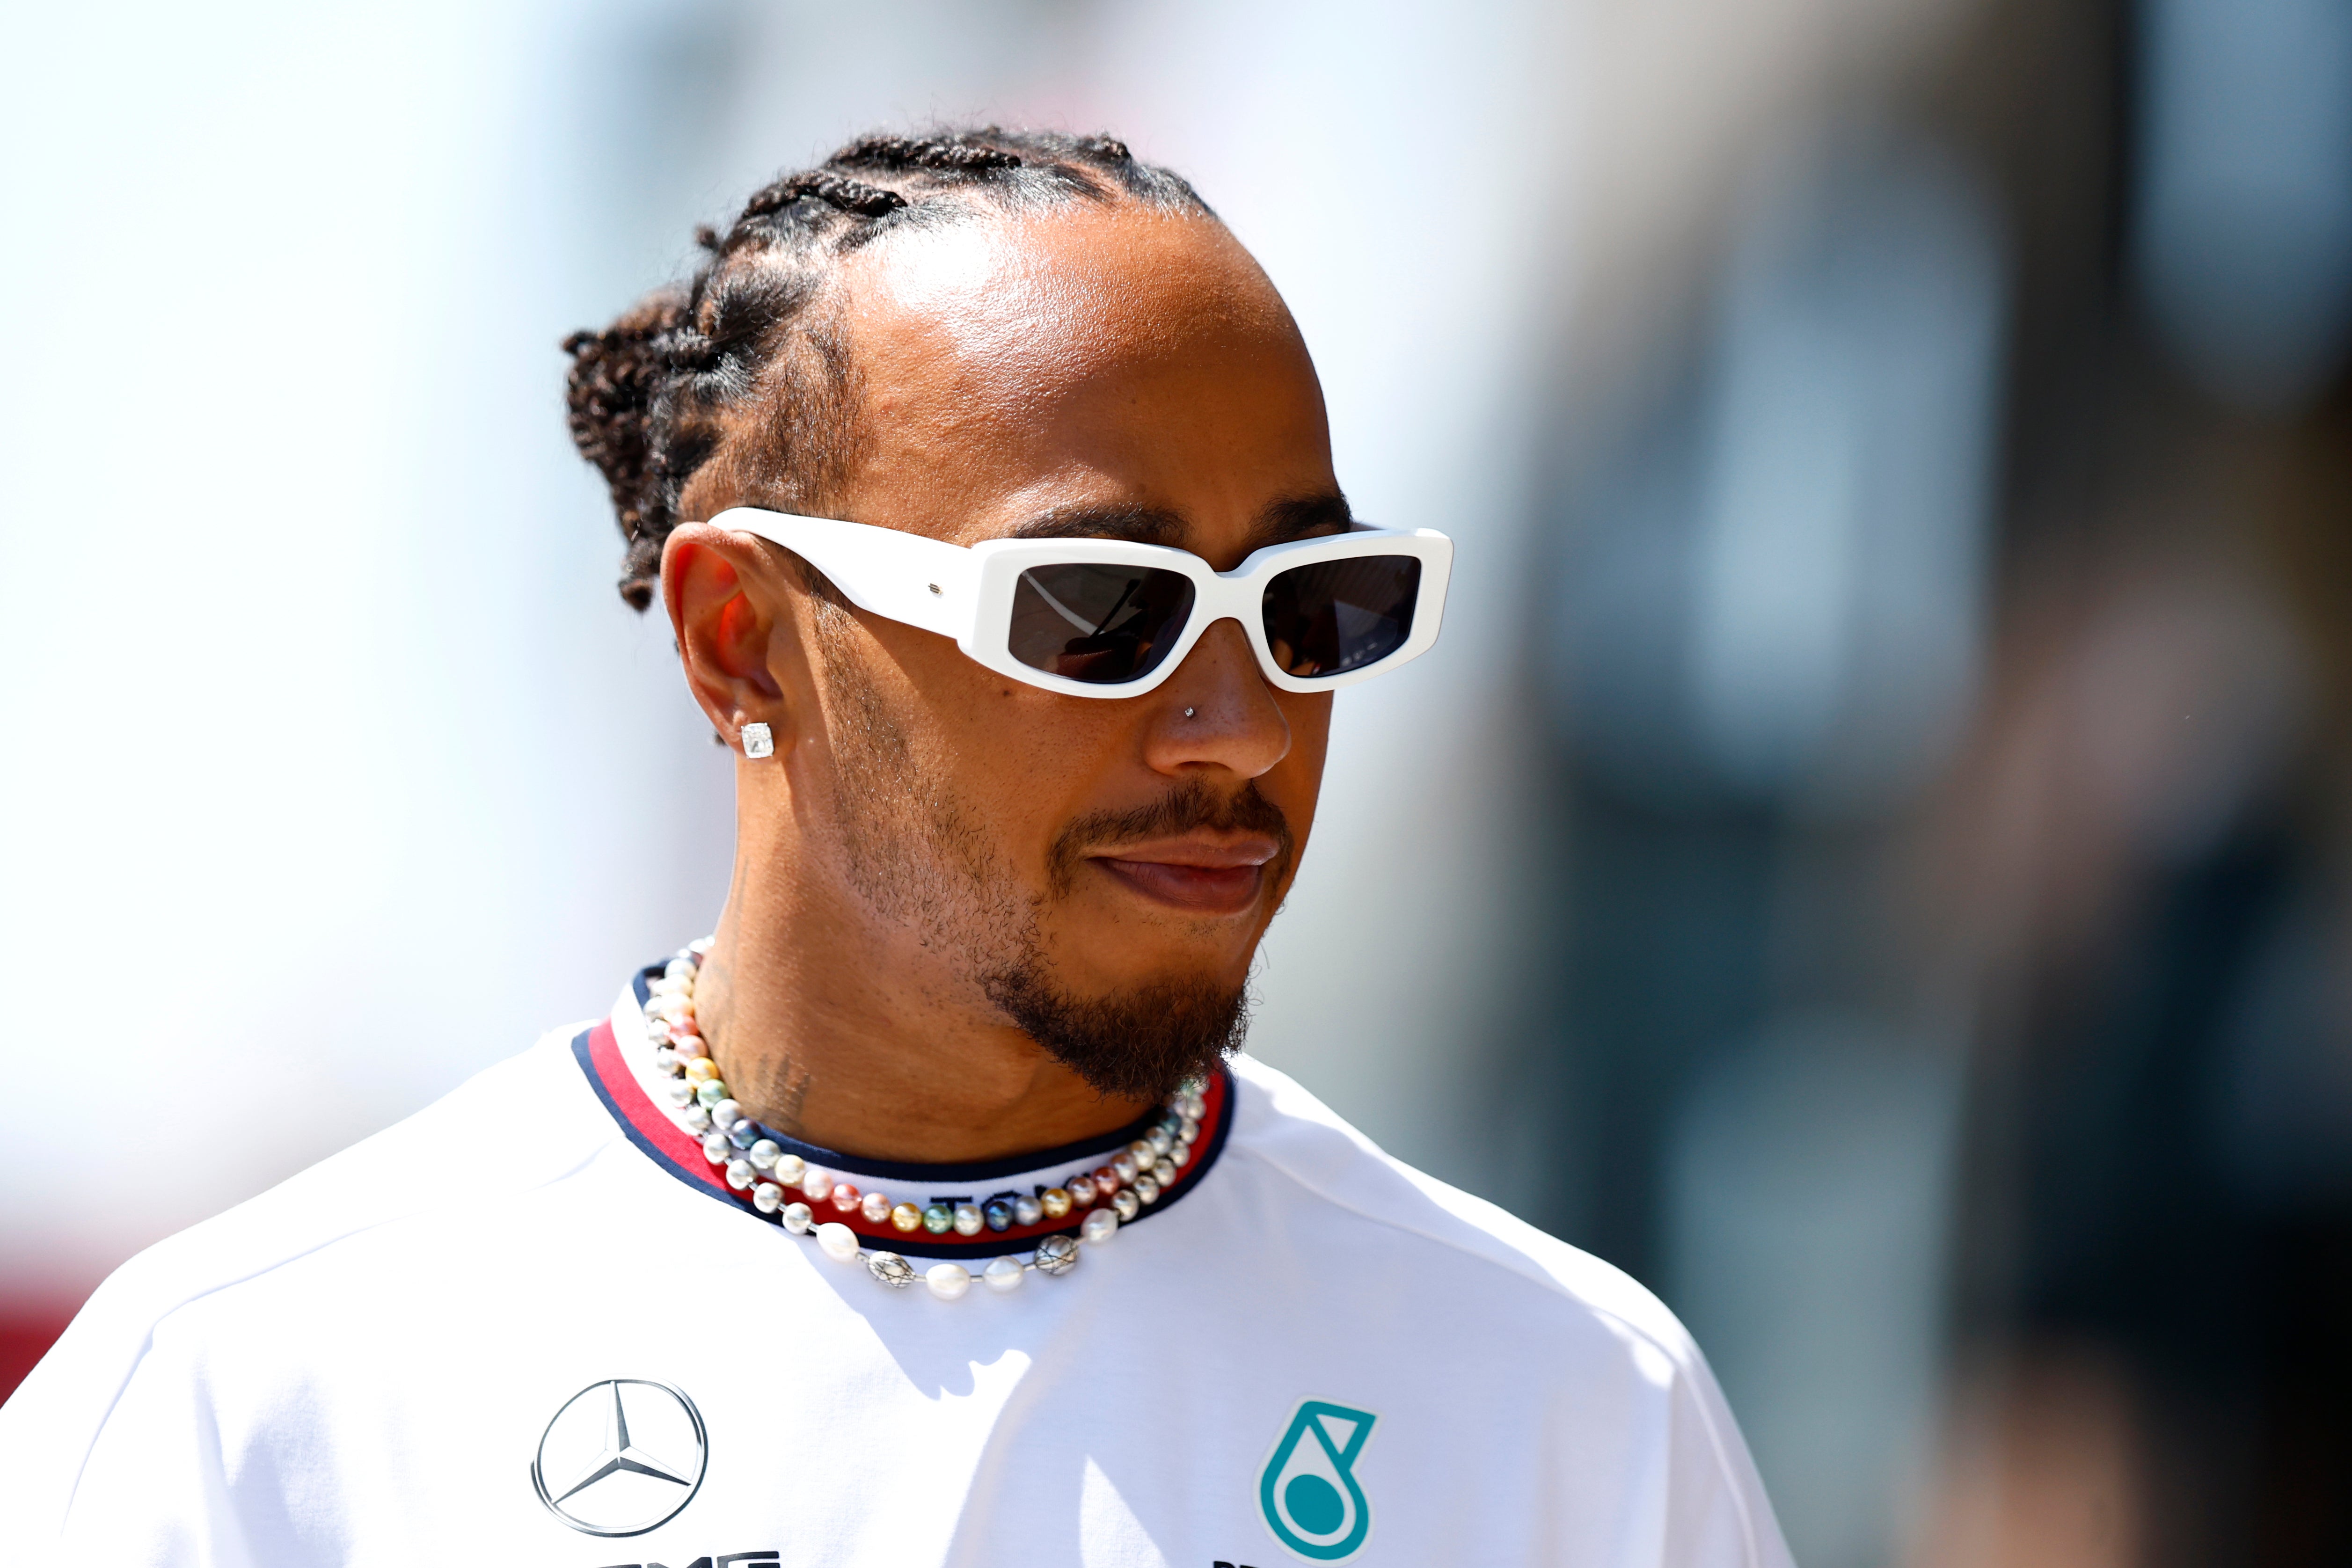 Lewis Hamilton criticised Red Bull’s decision to drop Nyck de Vries